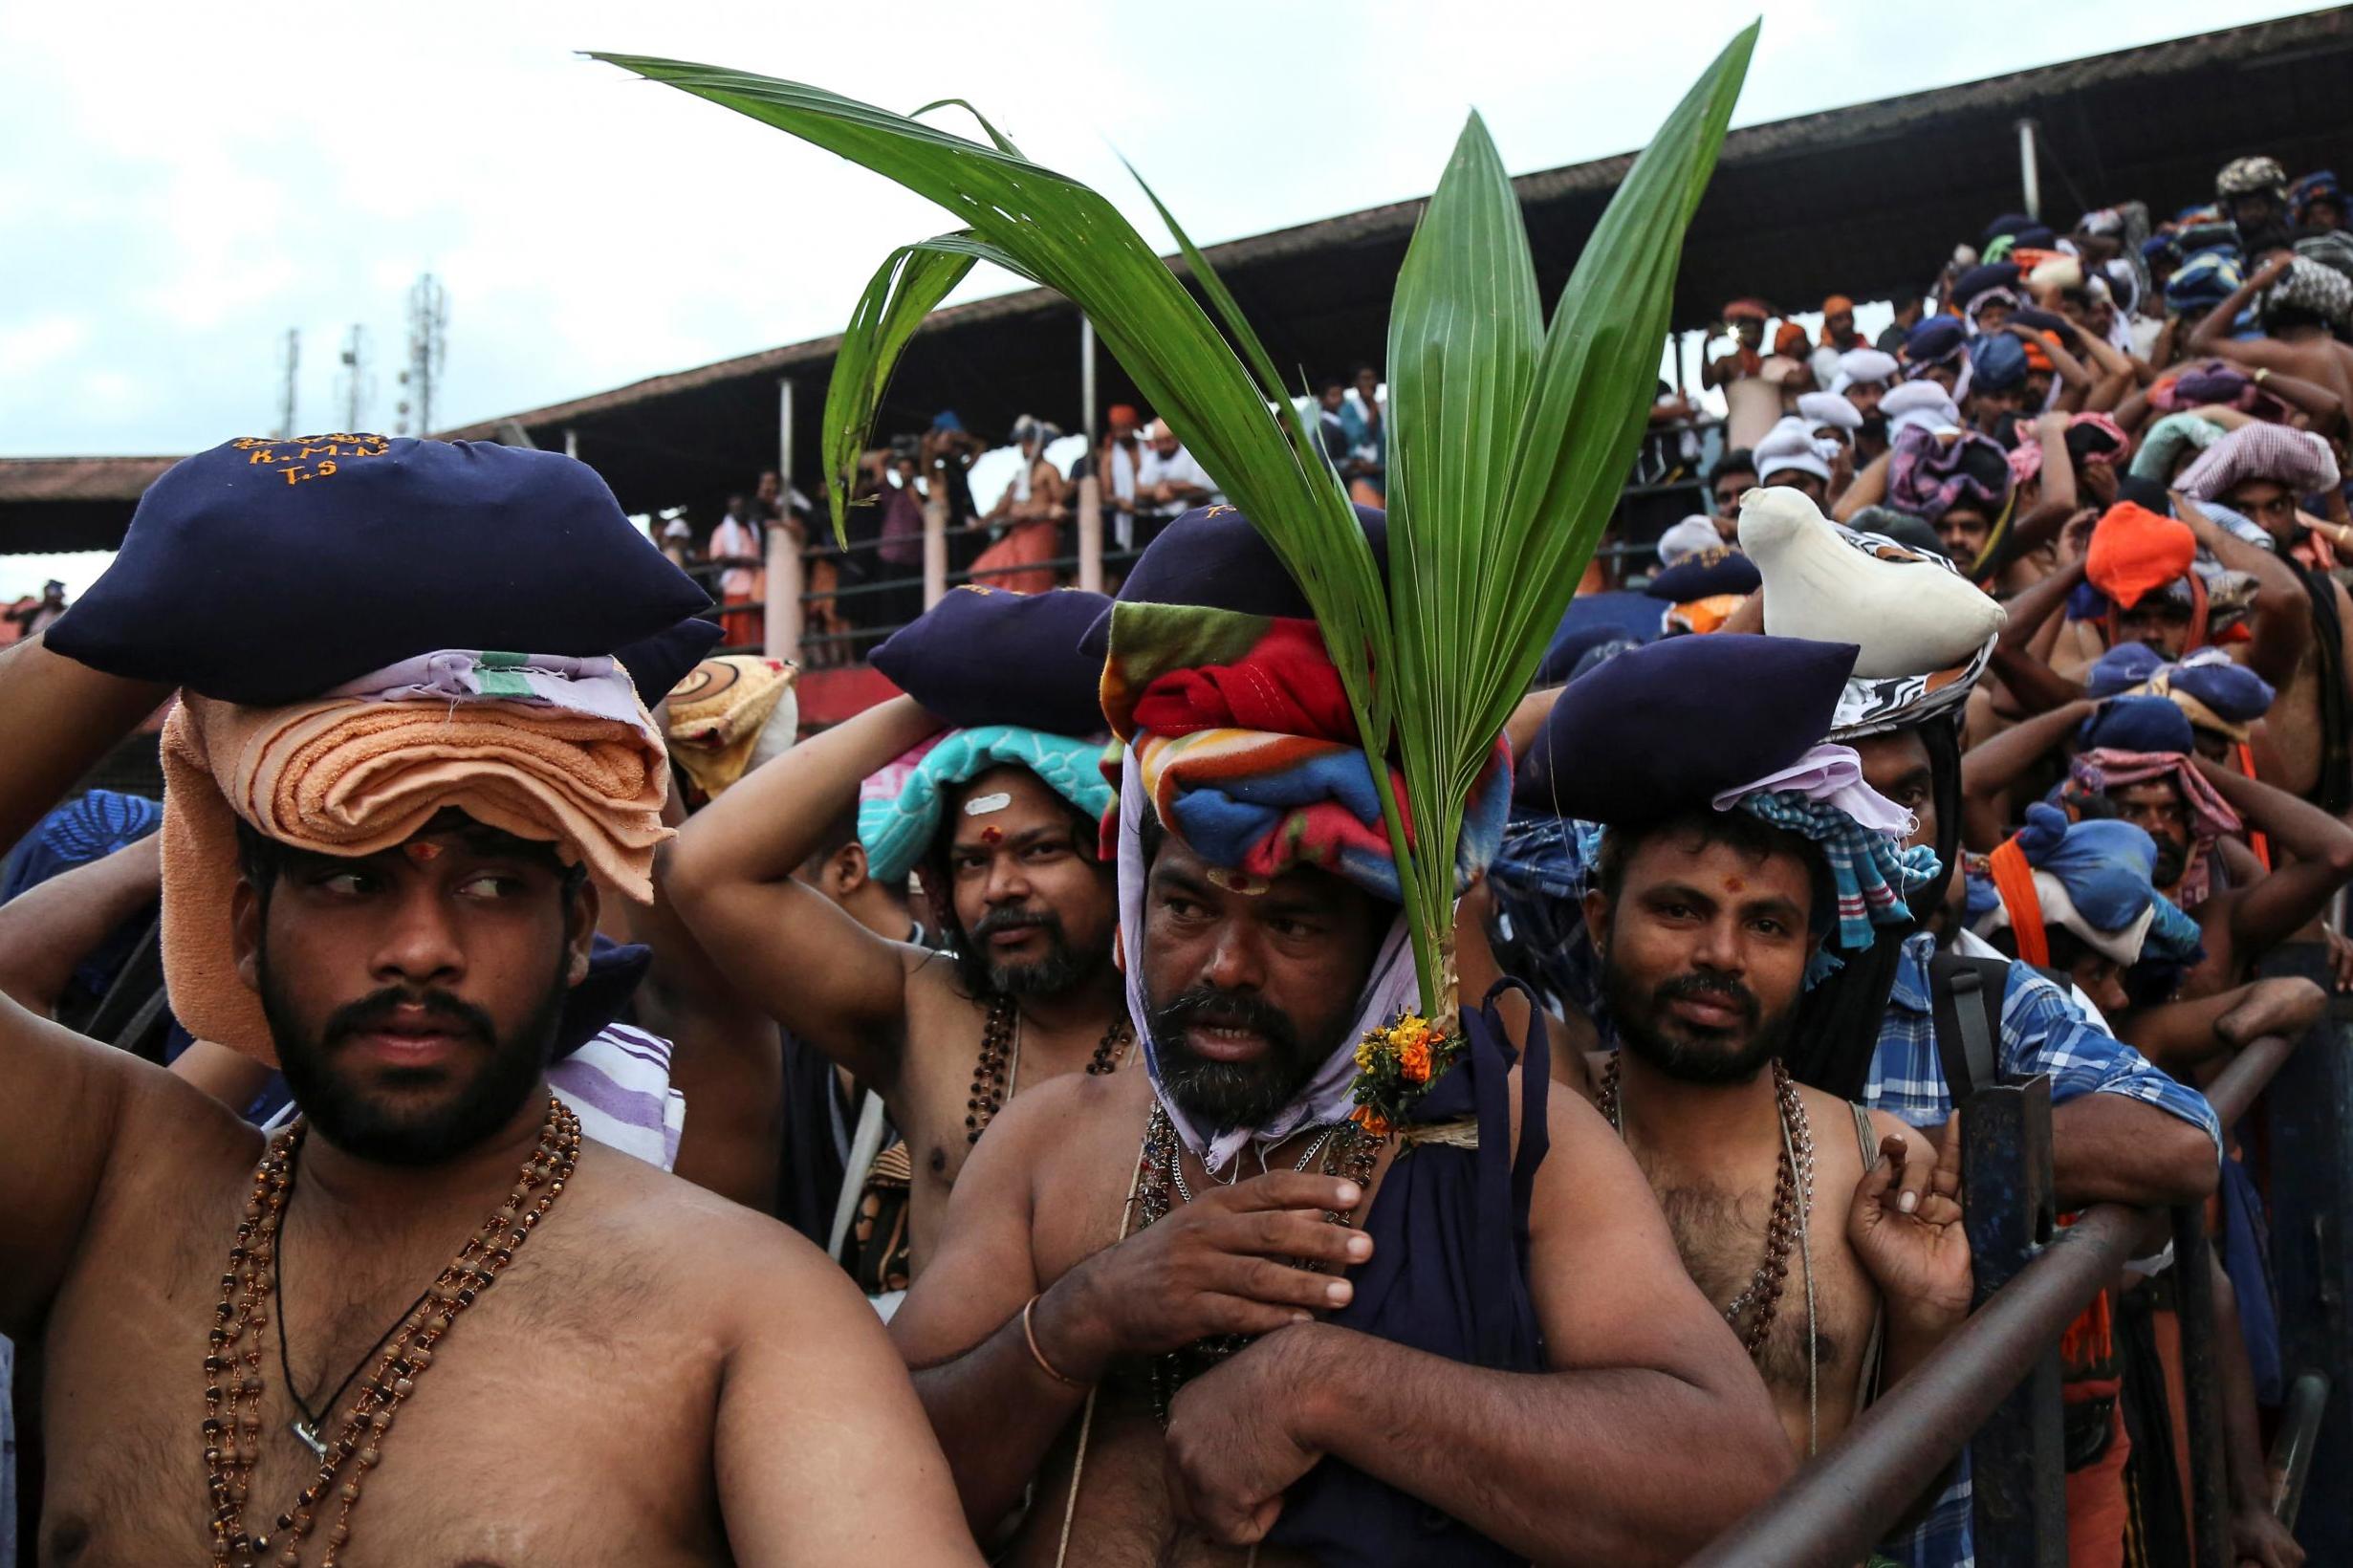 A Hindu devotee holds a coconut plant as he waits with others in queues inside the premises of the Sabarimala temple in Pathanamthitta district in the southern state of Kerala, India, 18 October 2018. (Sivaram V /